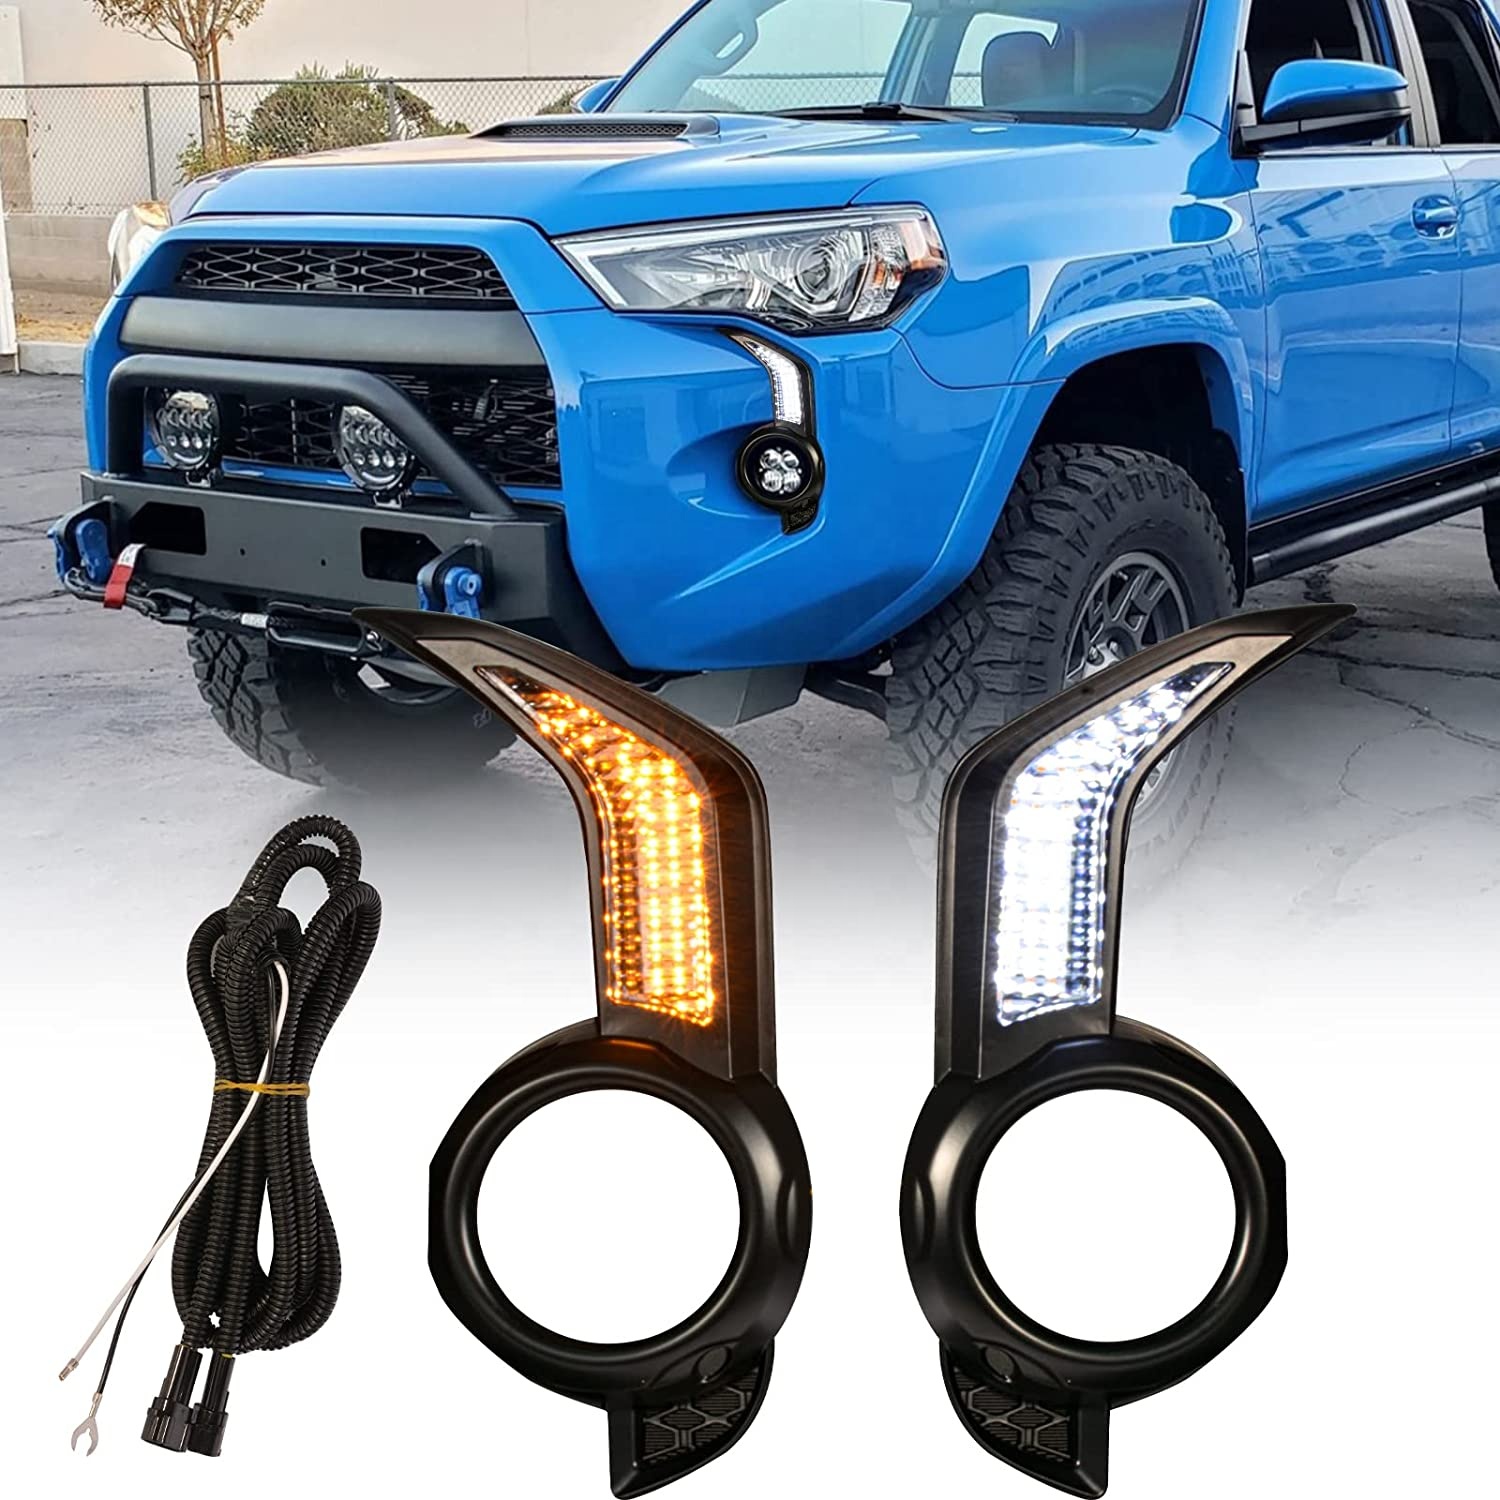 LED DRL Daytime Running Light Front Fog Daytime Running Lamps with Dynamic Sequential Turn Signal Lights For 4 Runner 2014-2021